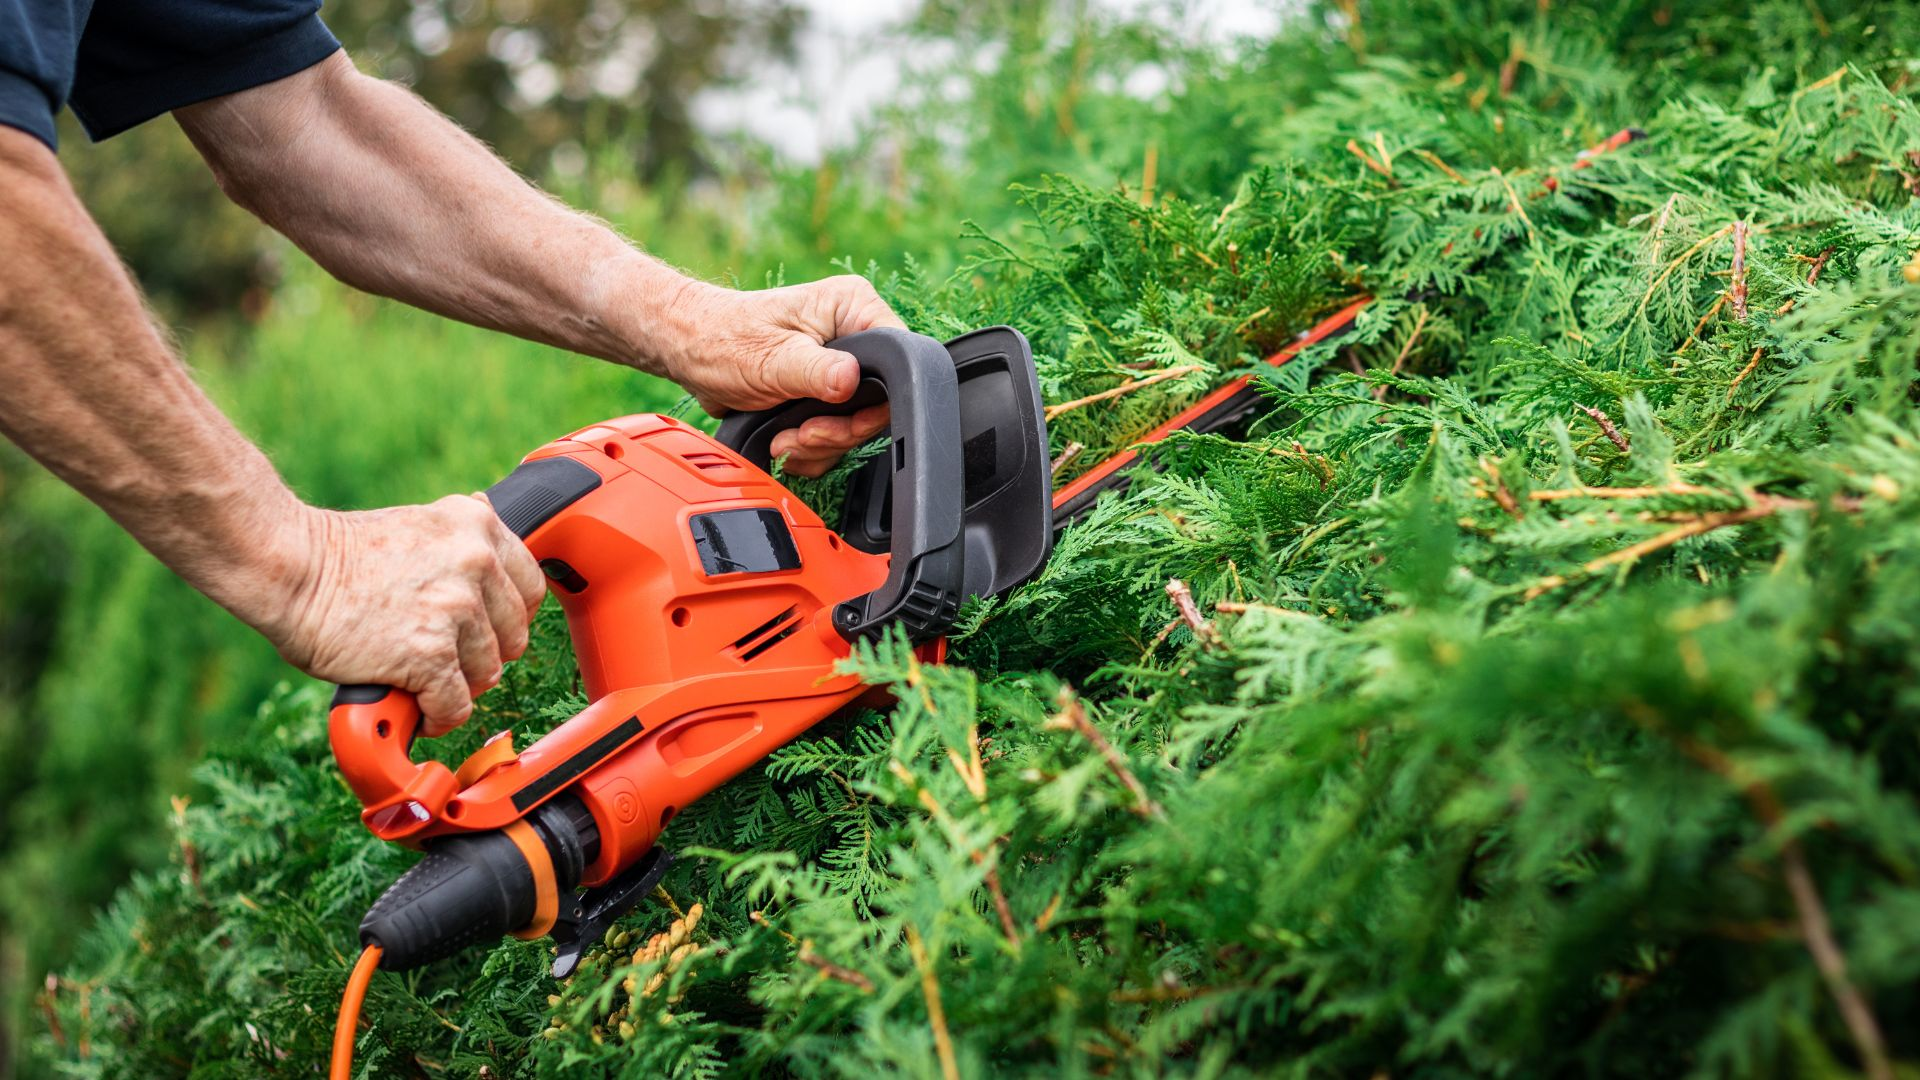 An image of a person using a hedge trimmer to cut back foliage too close to the home.